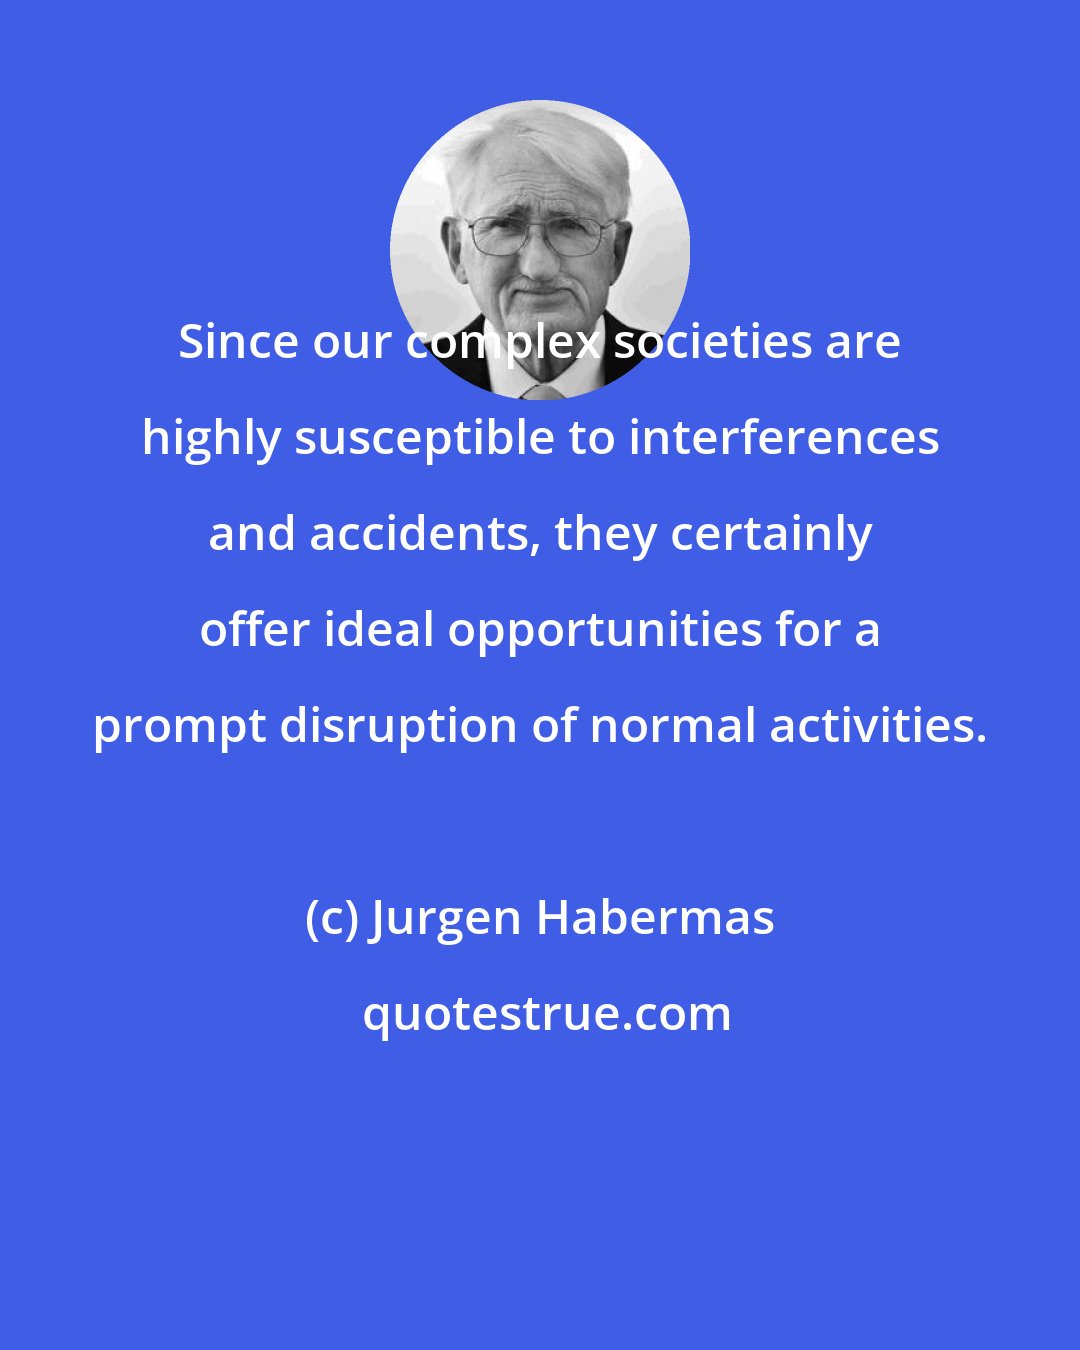 Jurgen Habermas: Since our complex societies are highly susceptible to interferences and accidents, they certainly offer ideal opportunities for a prompt disruption of normal activities.